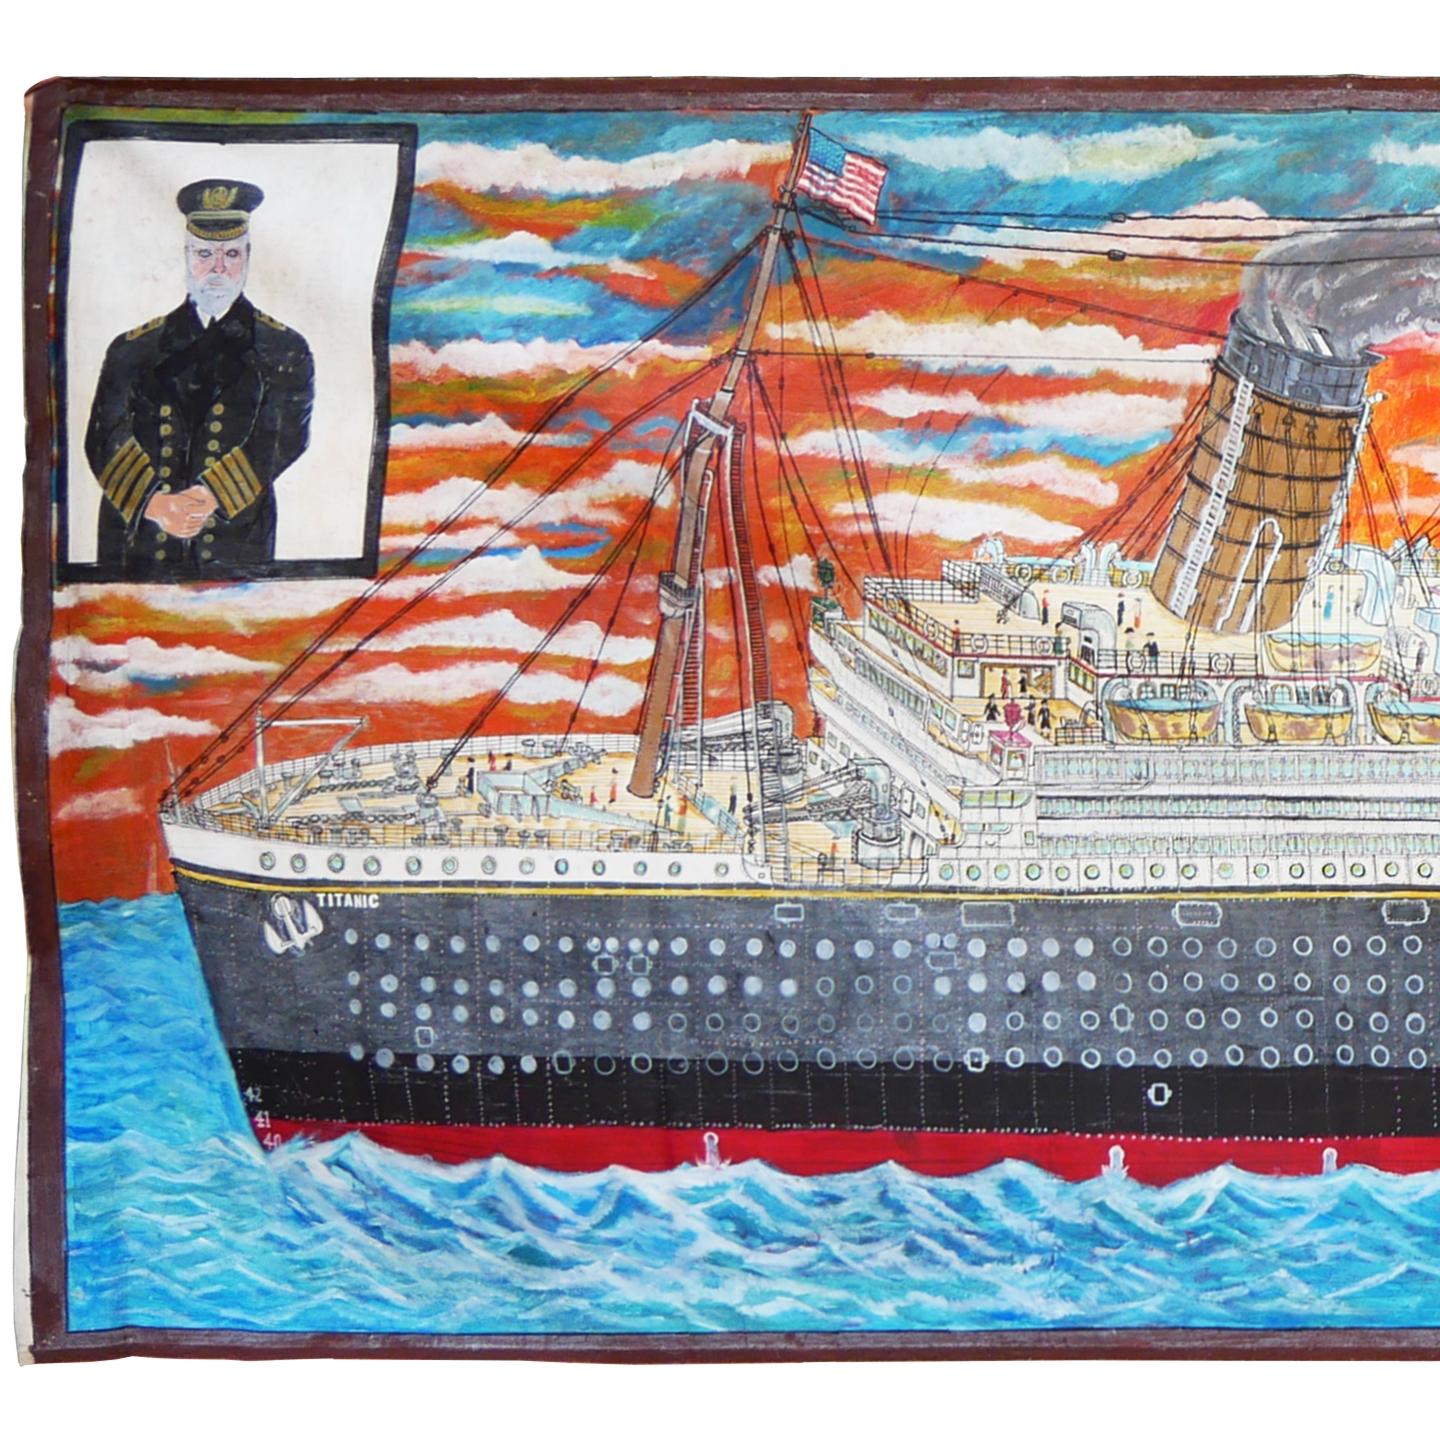 Blue and orange abstract contemporary outsider art. The piece depicts the massive Titanic ship against a dark orange sunset sky. The captain (Edward Smith) of the ship's portrait is emphasized in the upper left corner. The news about the tragedy is